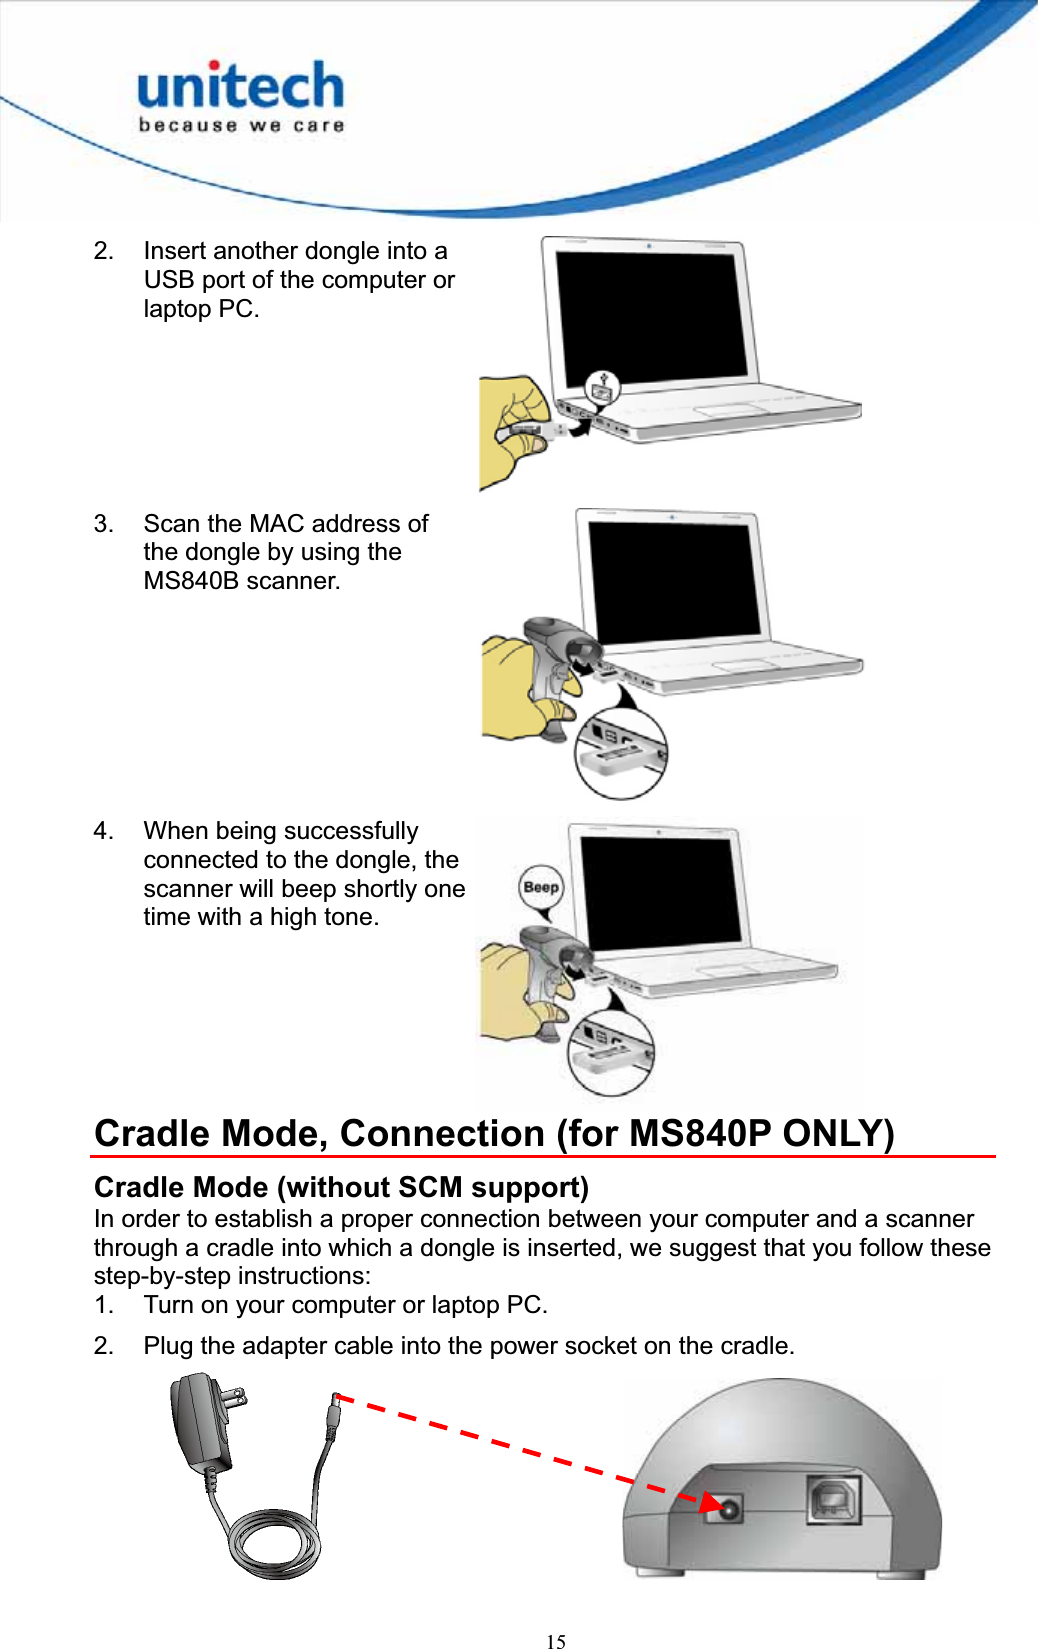 152.  Insert another dongle into a USB port of the computer or laptop PC. 3.  Scan the MAC address of the dongle by using the MS840B scanner. 4.  When being successfully connected to the dongle, the scanner will beep shortly one time with a high tone. Cradle Mode, Connection (for MS840P ONLY) Cradle Mode (without SCM support) In order to establish a proper connection between your computer and a scanner through a cradle into which a dongle is inserted, we suggest that you follow these step-by-step instructions: 1.  Turn on your computer or laptop PC. 2.  Plug the adapter cable into the power socket on the cradle.       